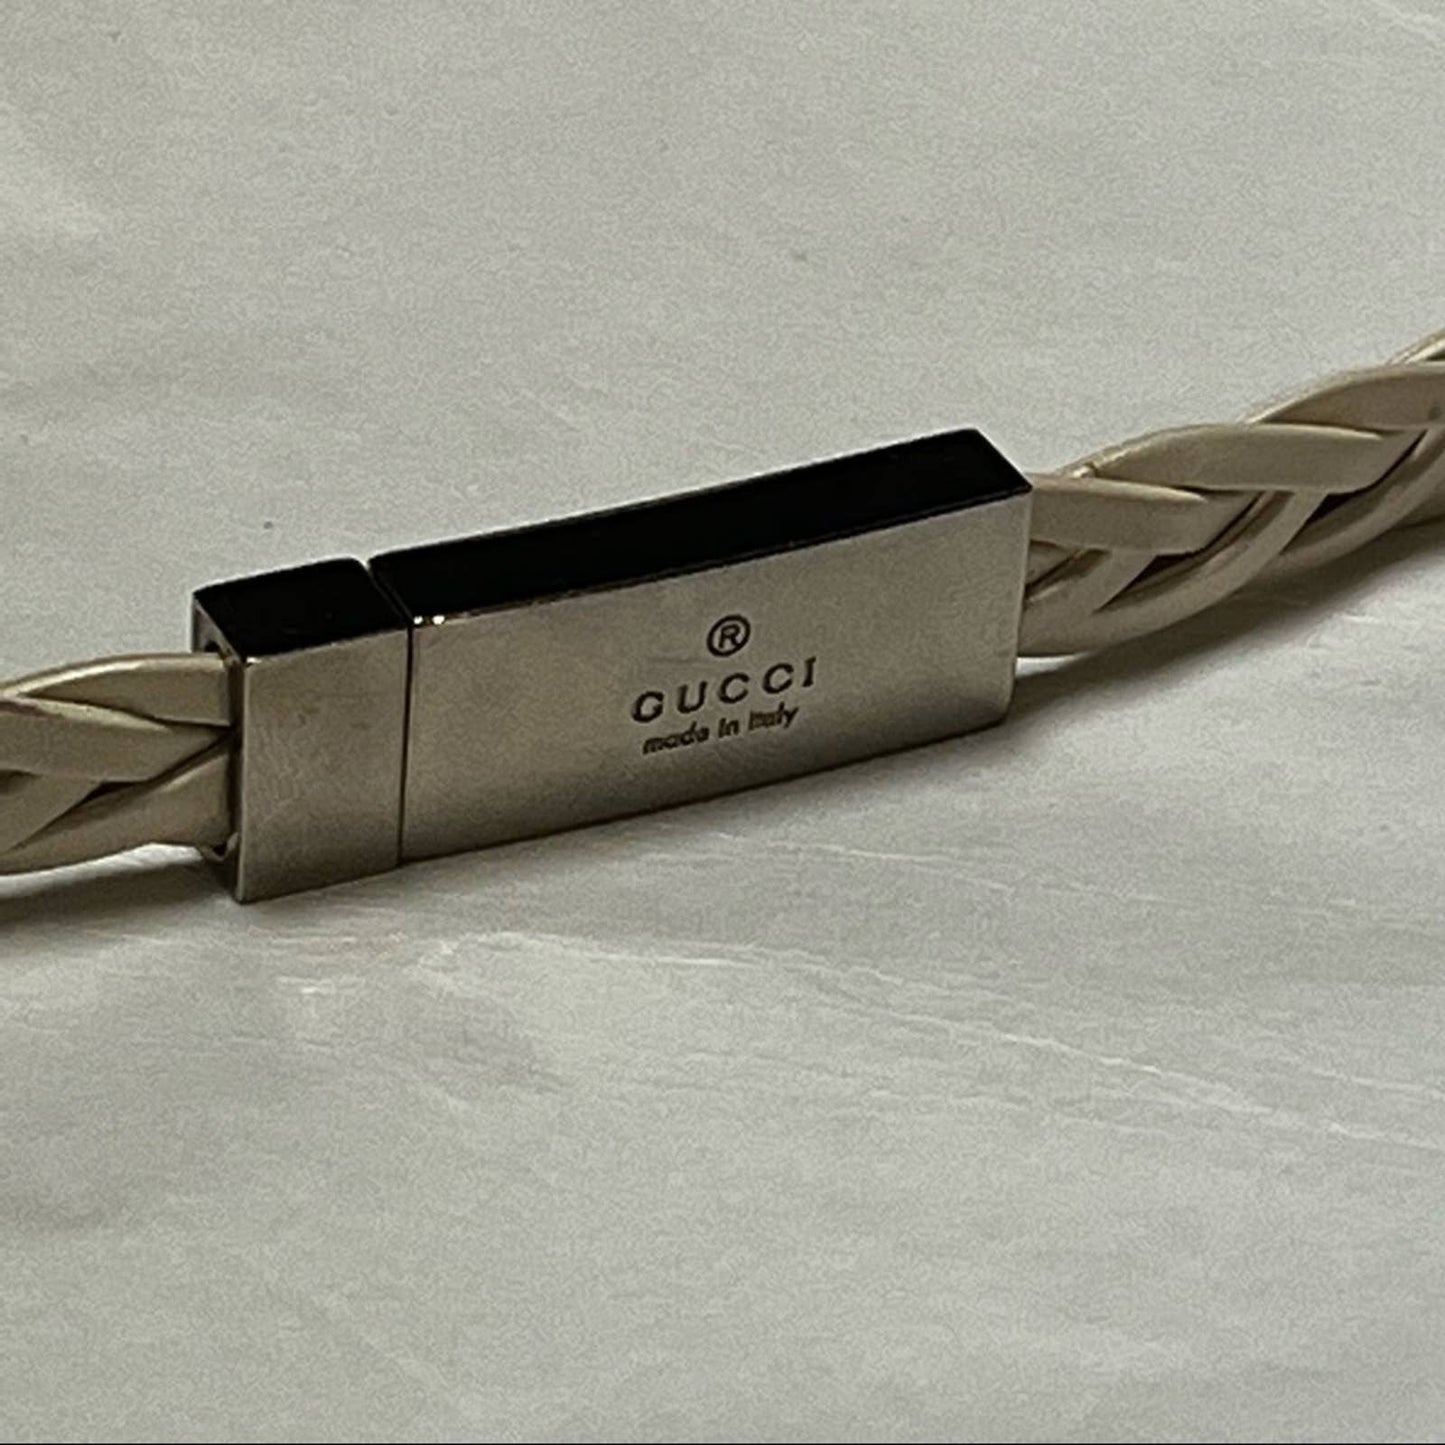 Gucci White Leather Woven Belt • 28”